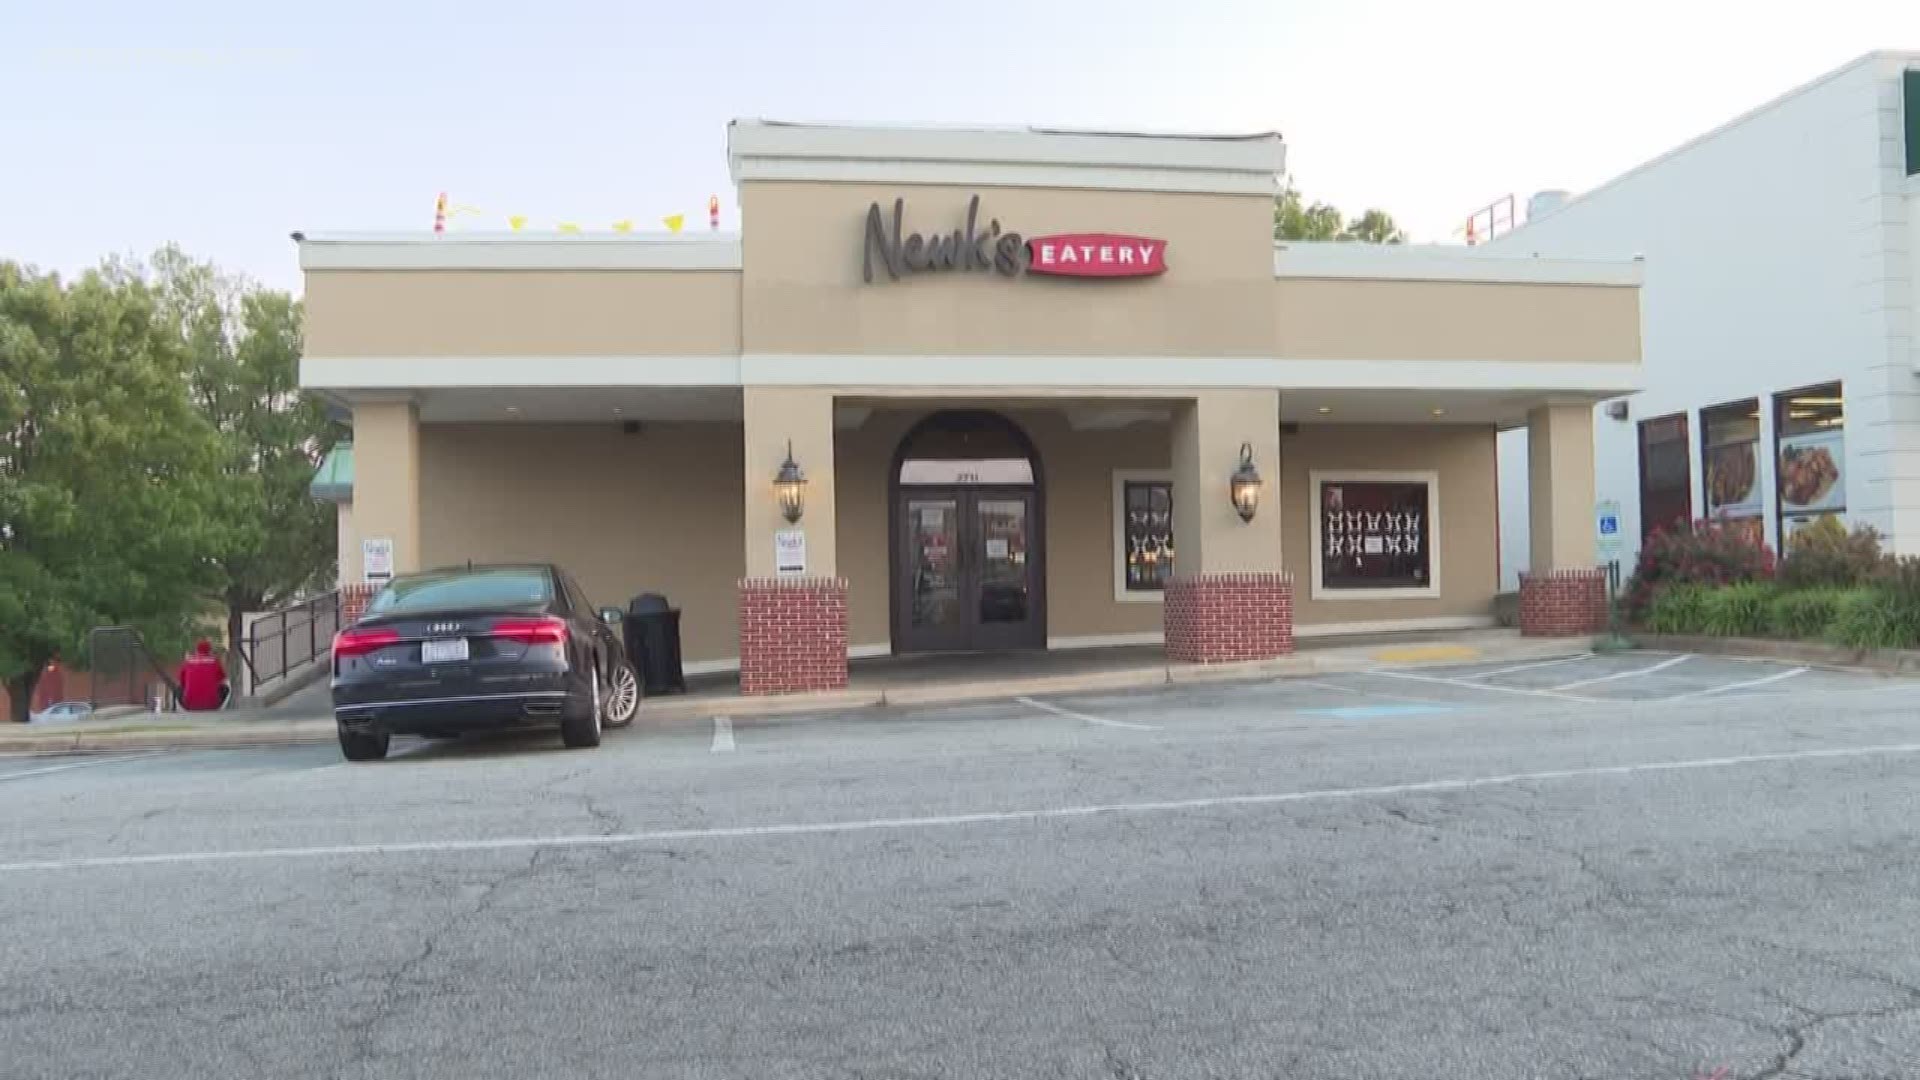 Newk's Eatery closed in the Friendly Center, now its former employees are looking for a new job. The franchise owner says employees had notice, but many of them disagree.